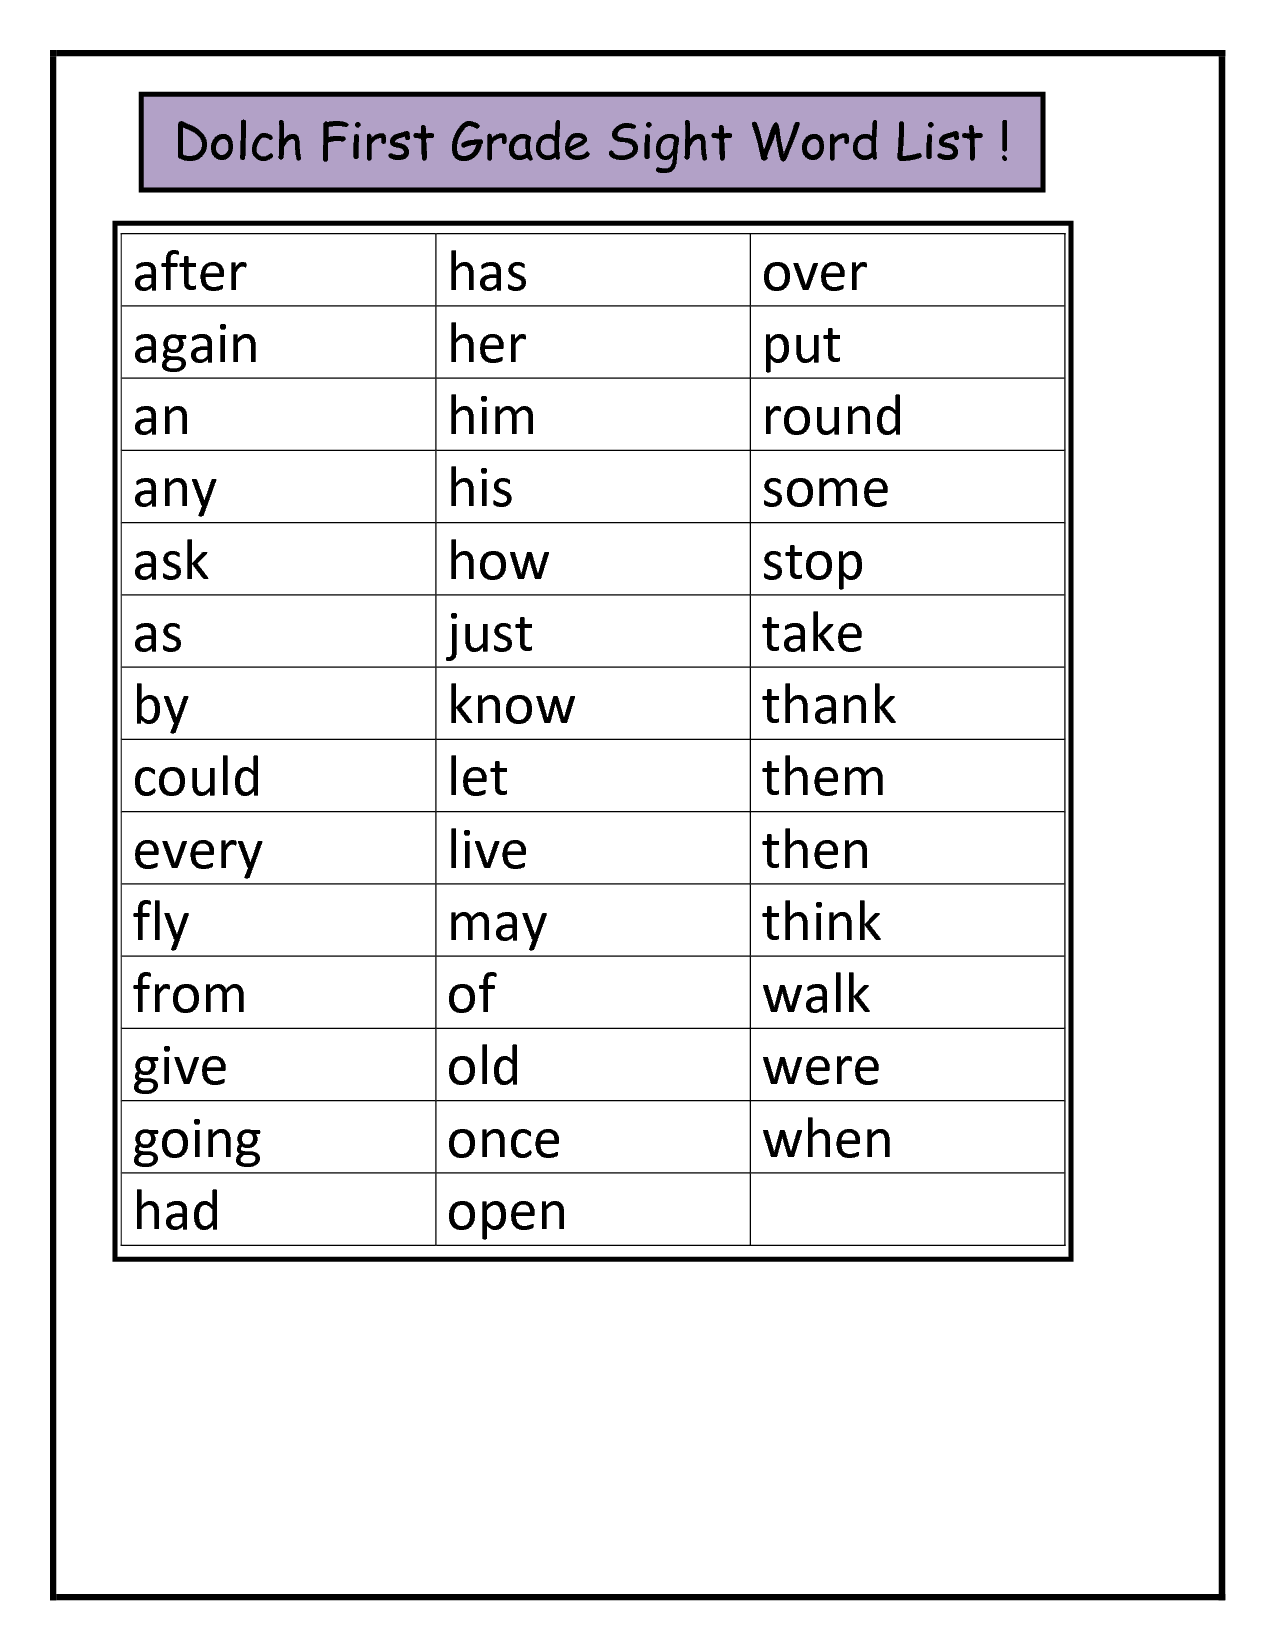 dolch-sight-word-list-printable